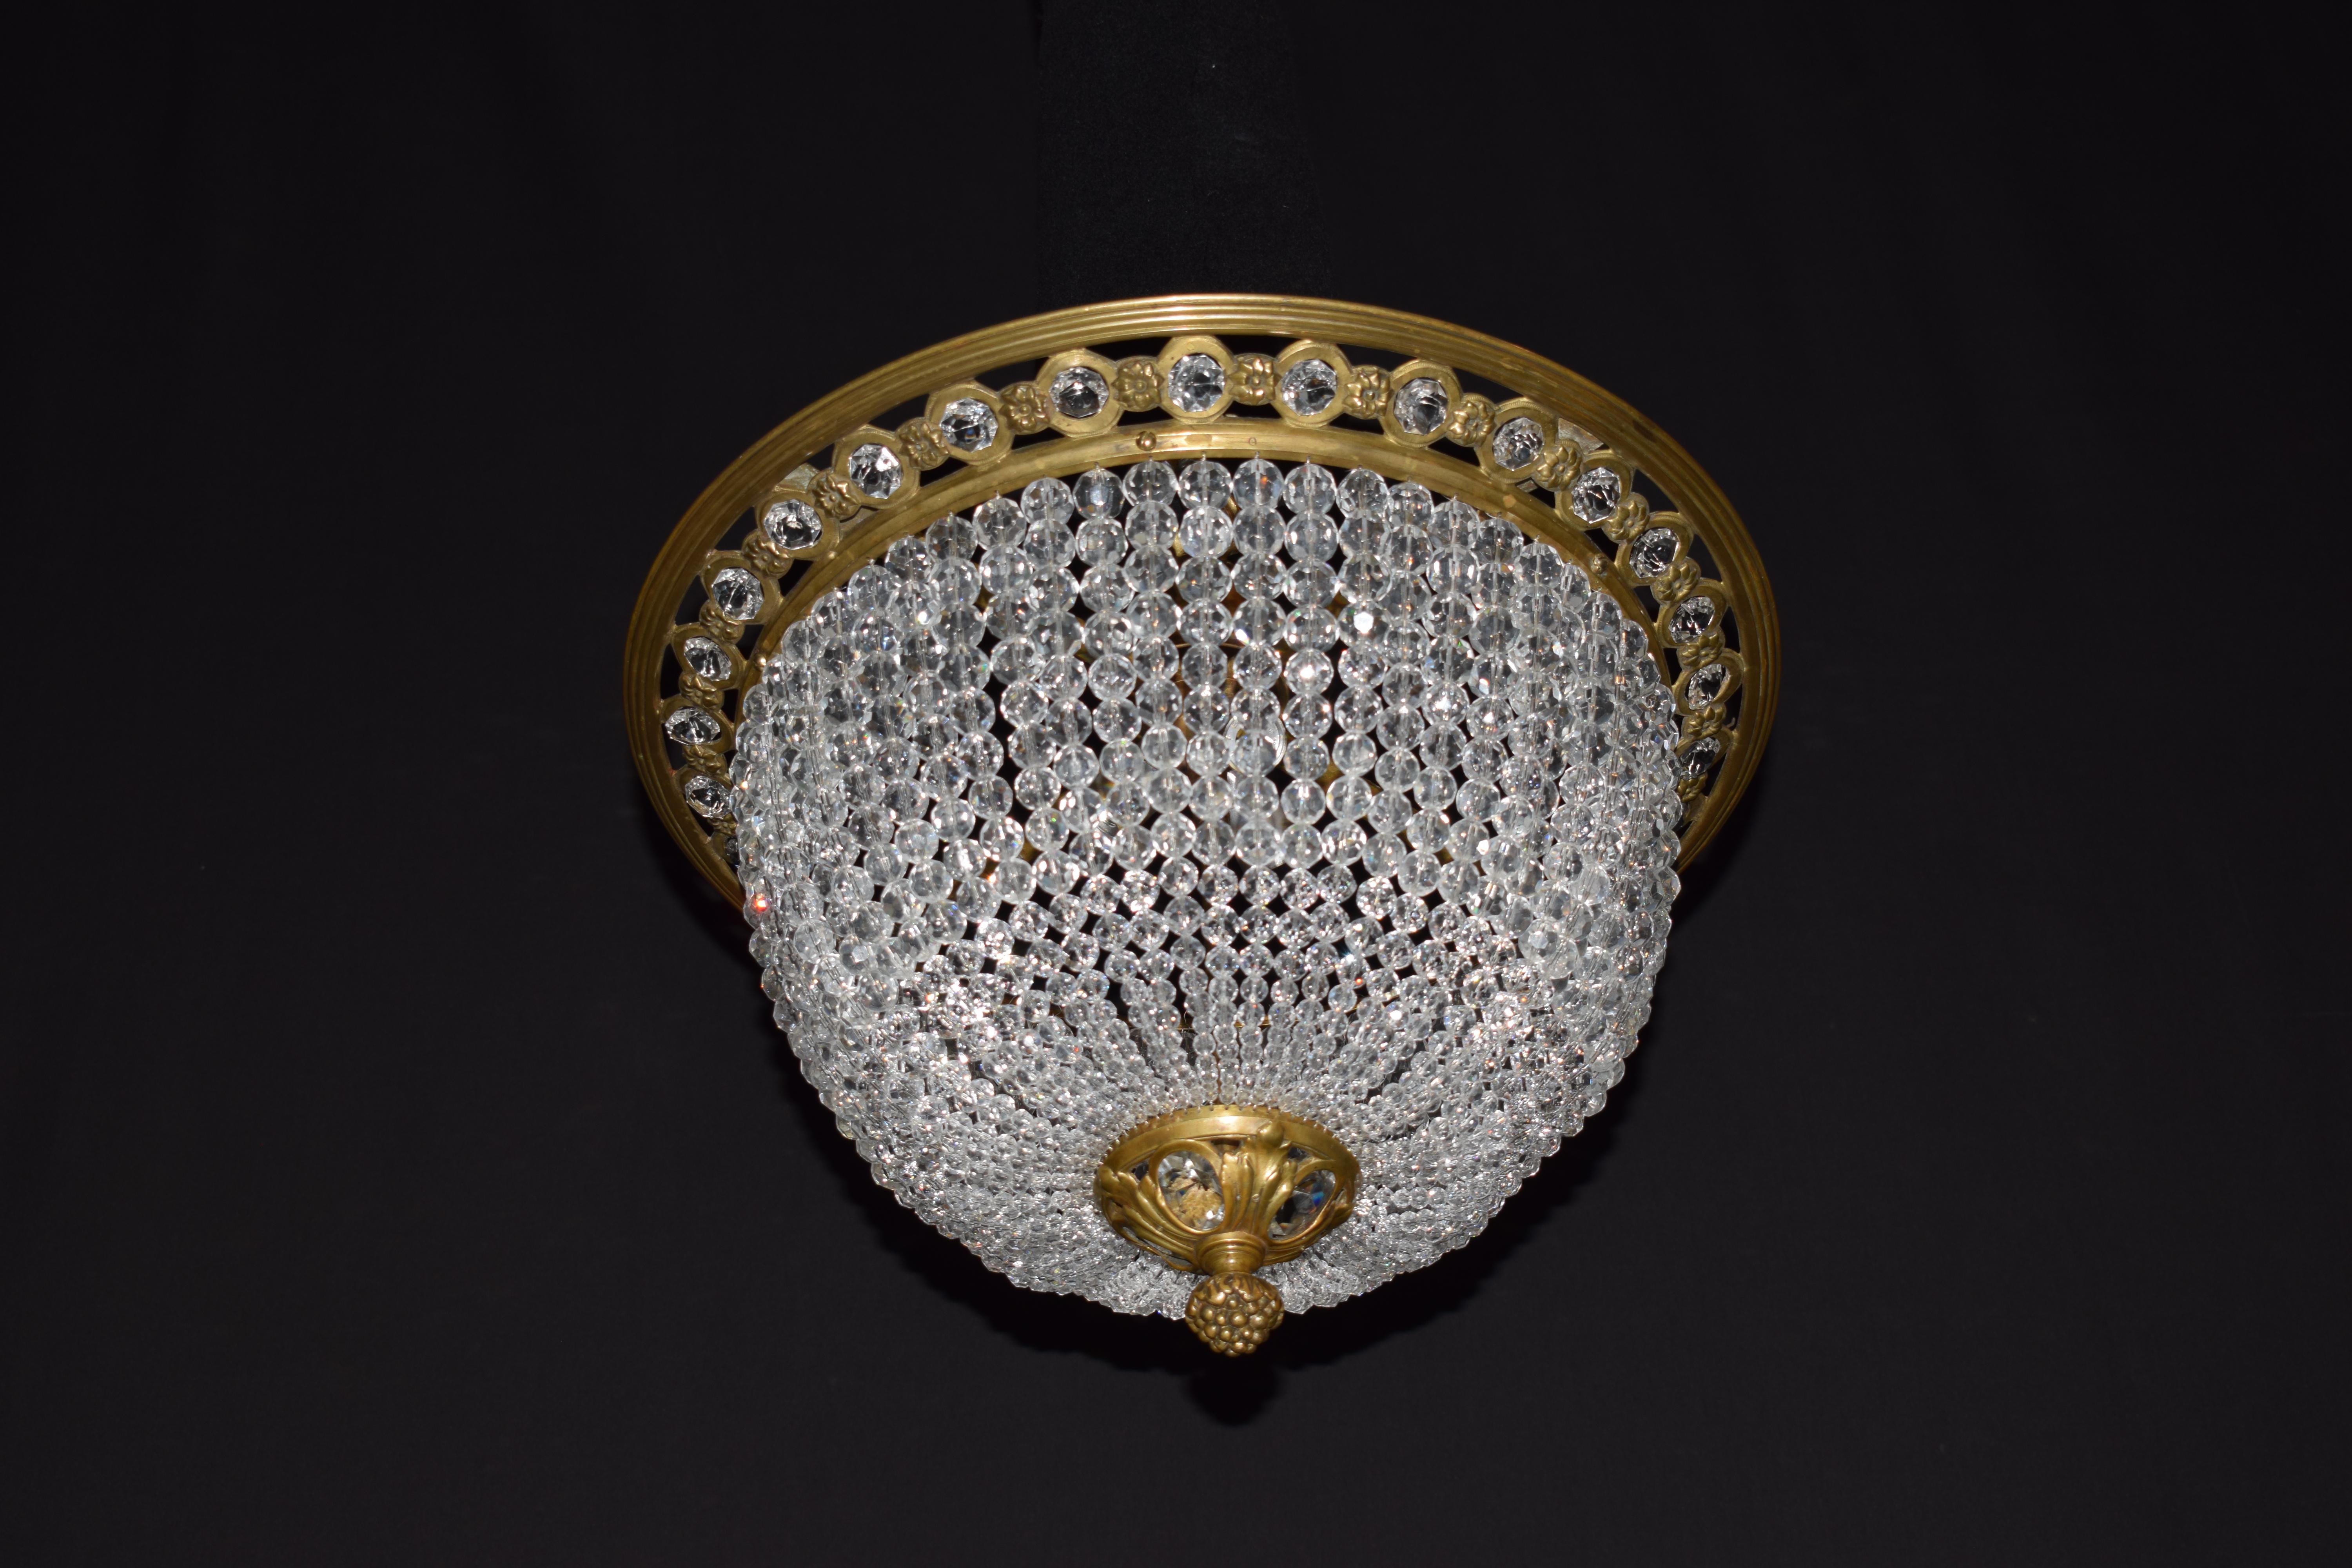 A Very Nice & Decorative  Gilt Bronze & Crystal Pendant (could be used as a flush mounted fixture) France, circa 1920. 3 lights. 
Dimensions: Height 17